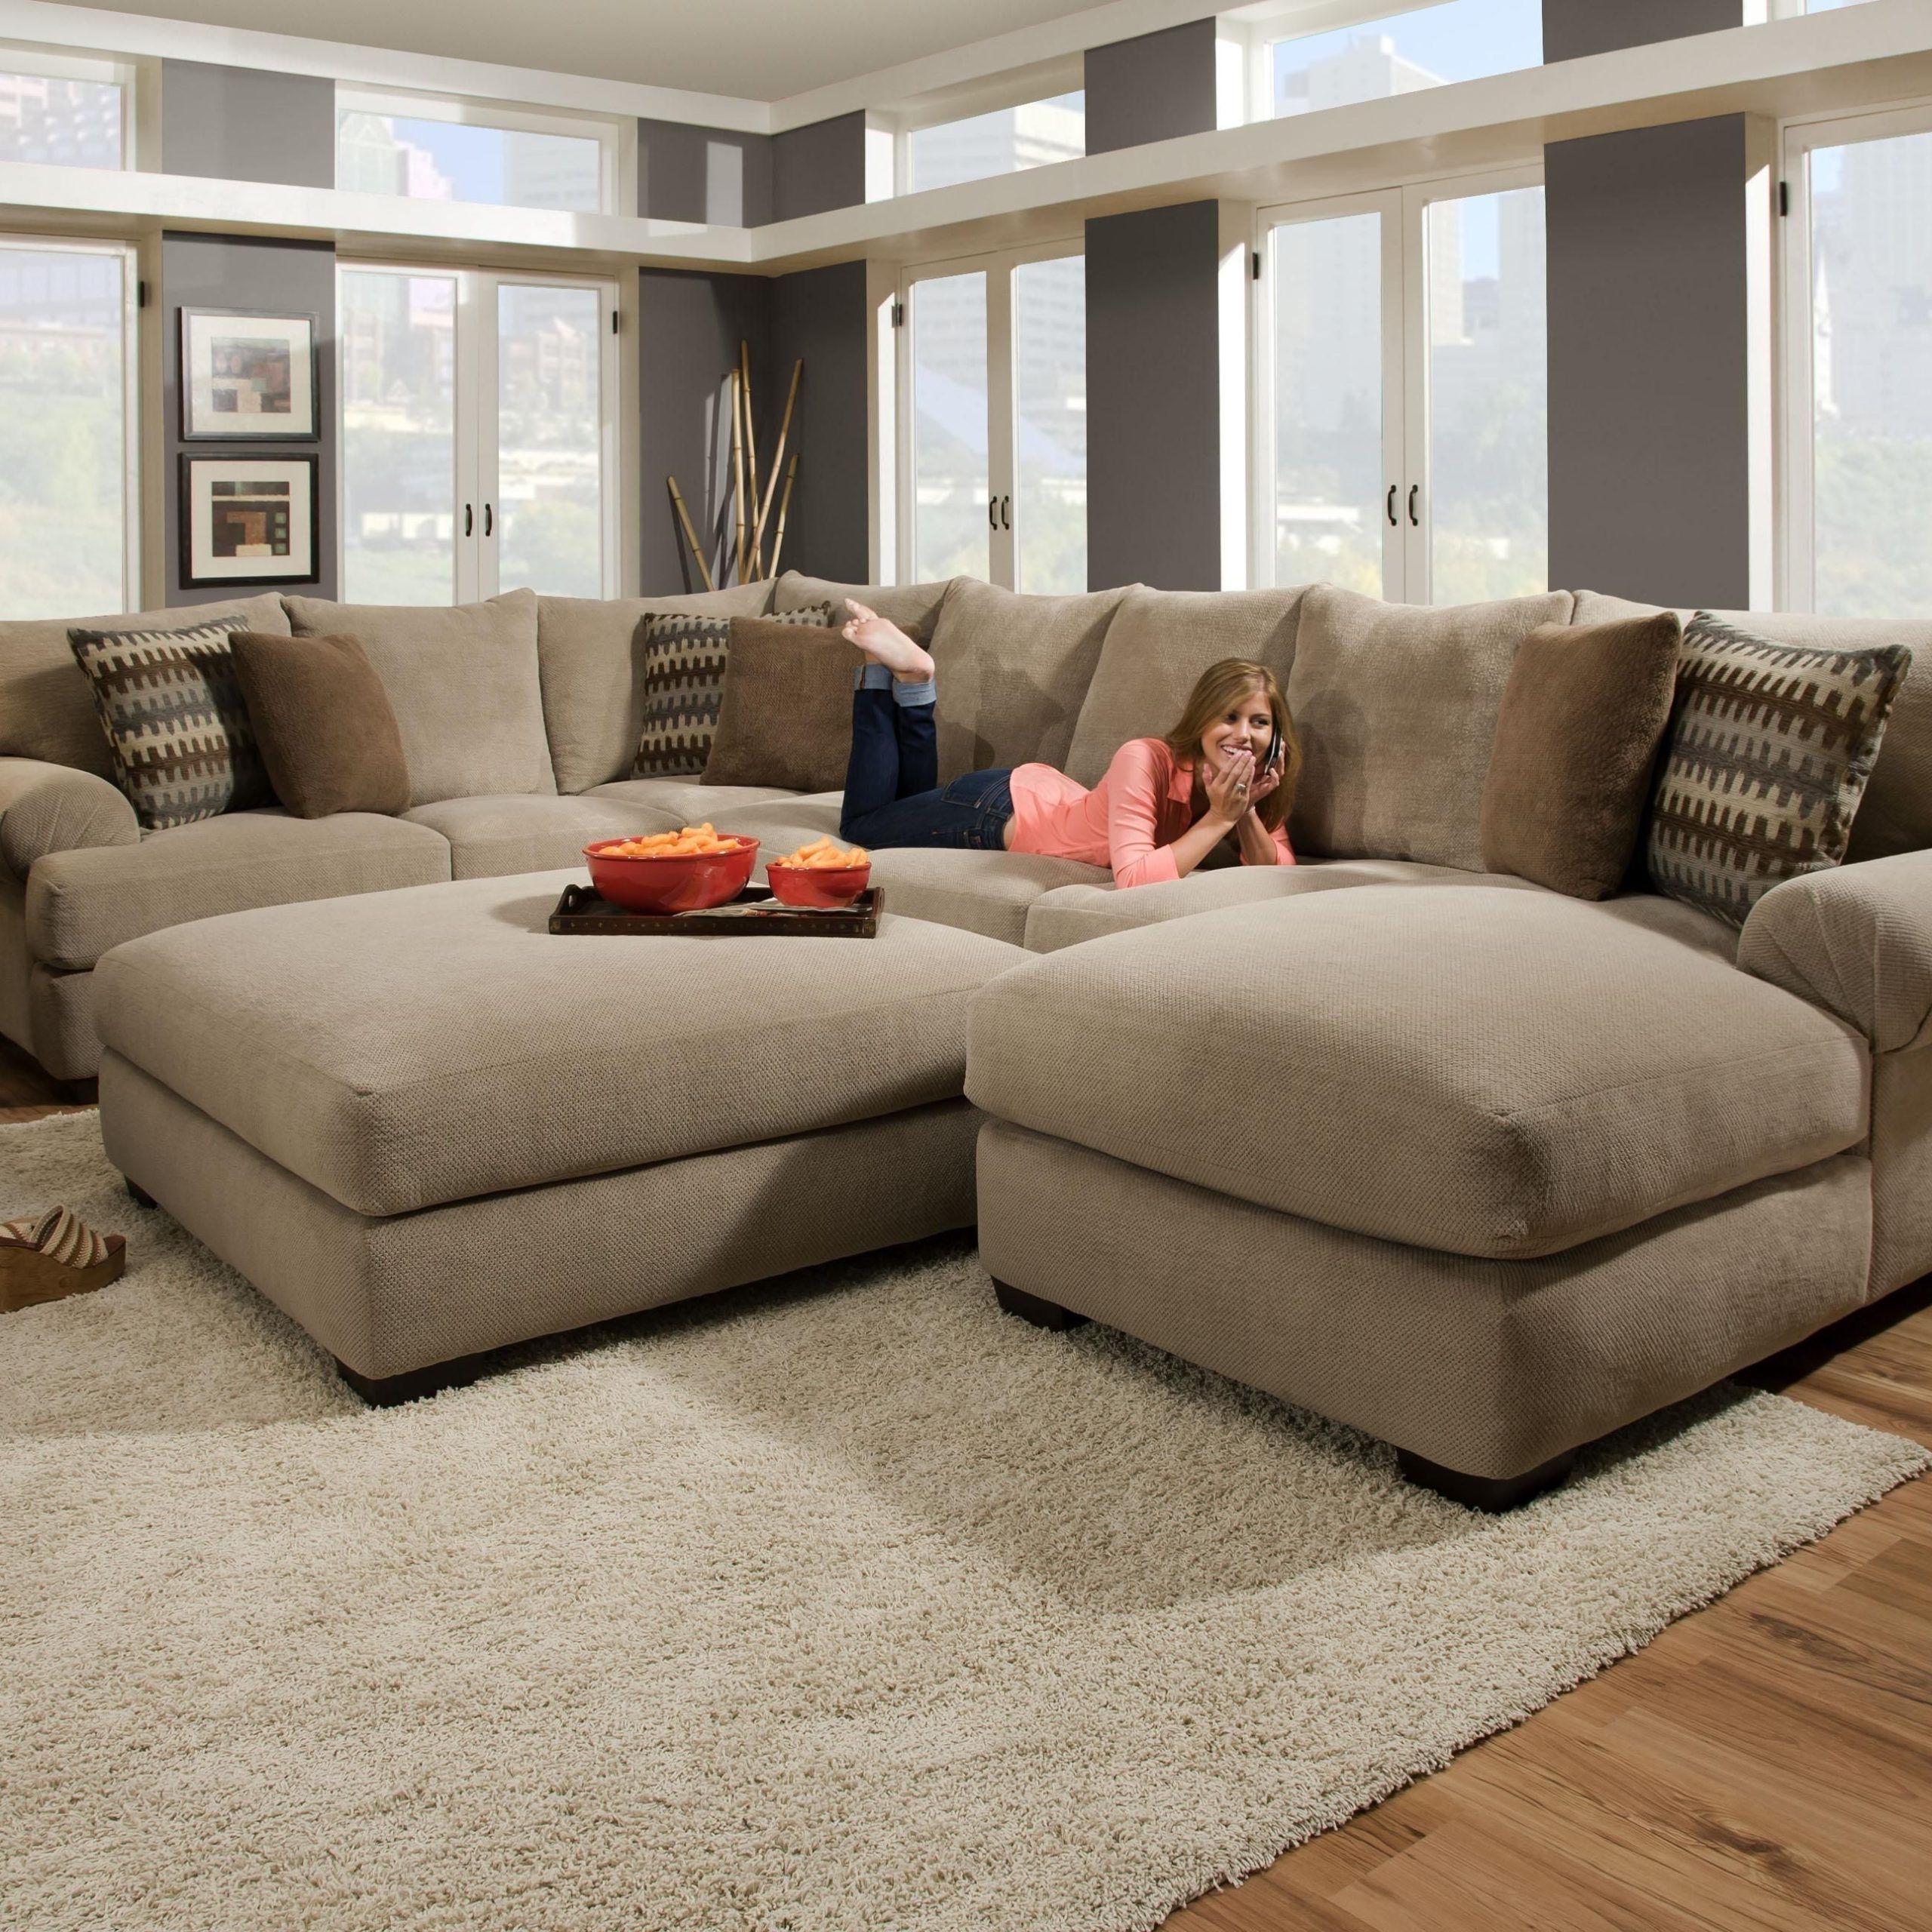 Best 10+ Of Deep U Shaped Sectionals | Comfortable Sectional Sofa Inside Modern U Shaped Sectional Couch Sets (Gallery 16 of 20)